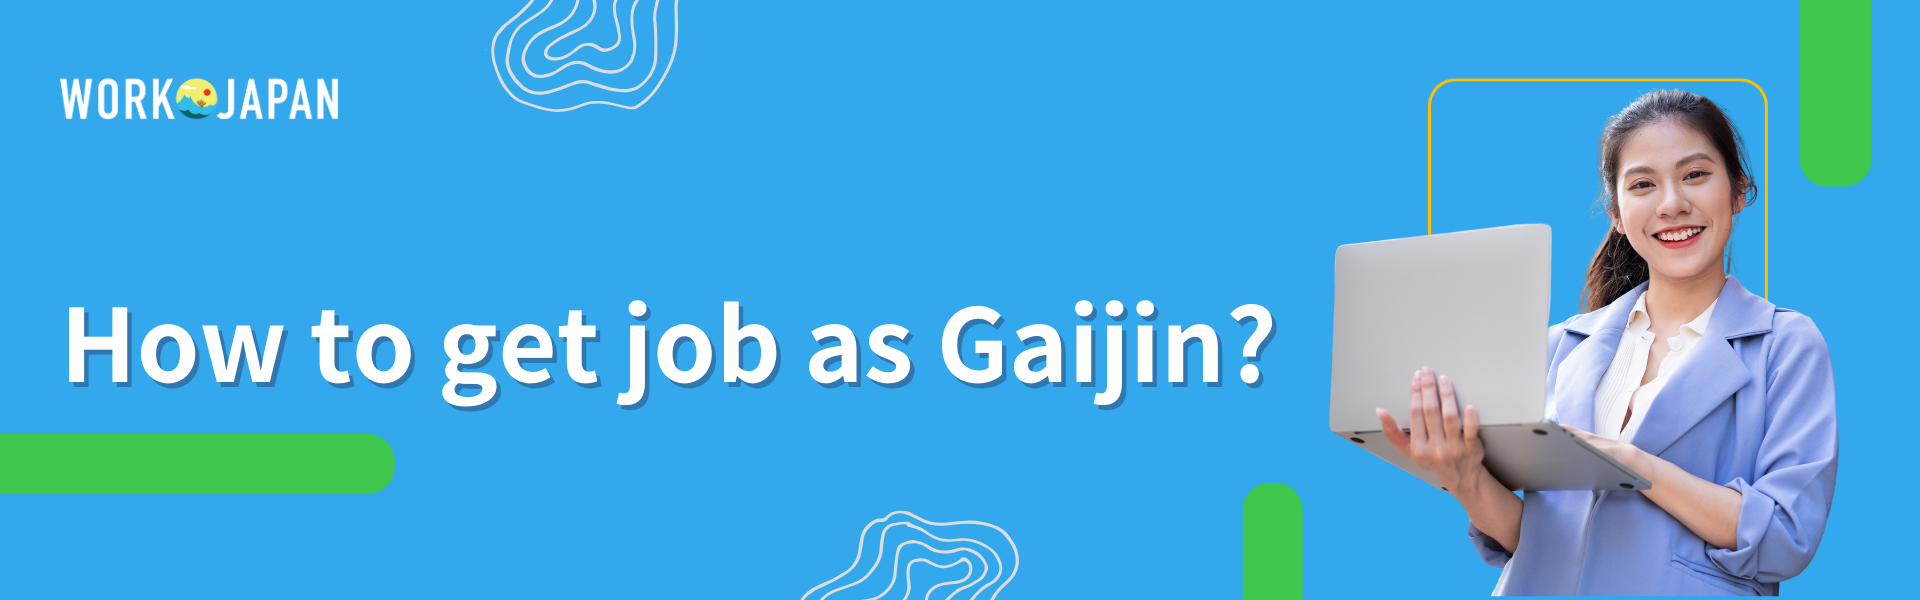 How to get job as Gaijin? Complete guide to get hired